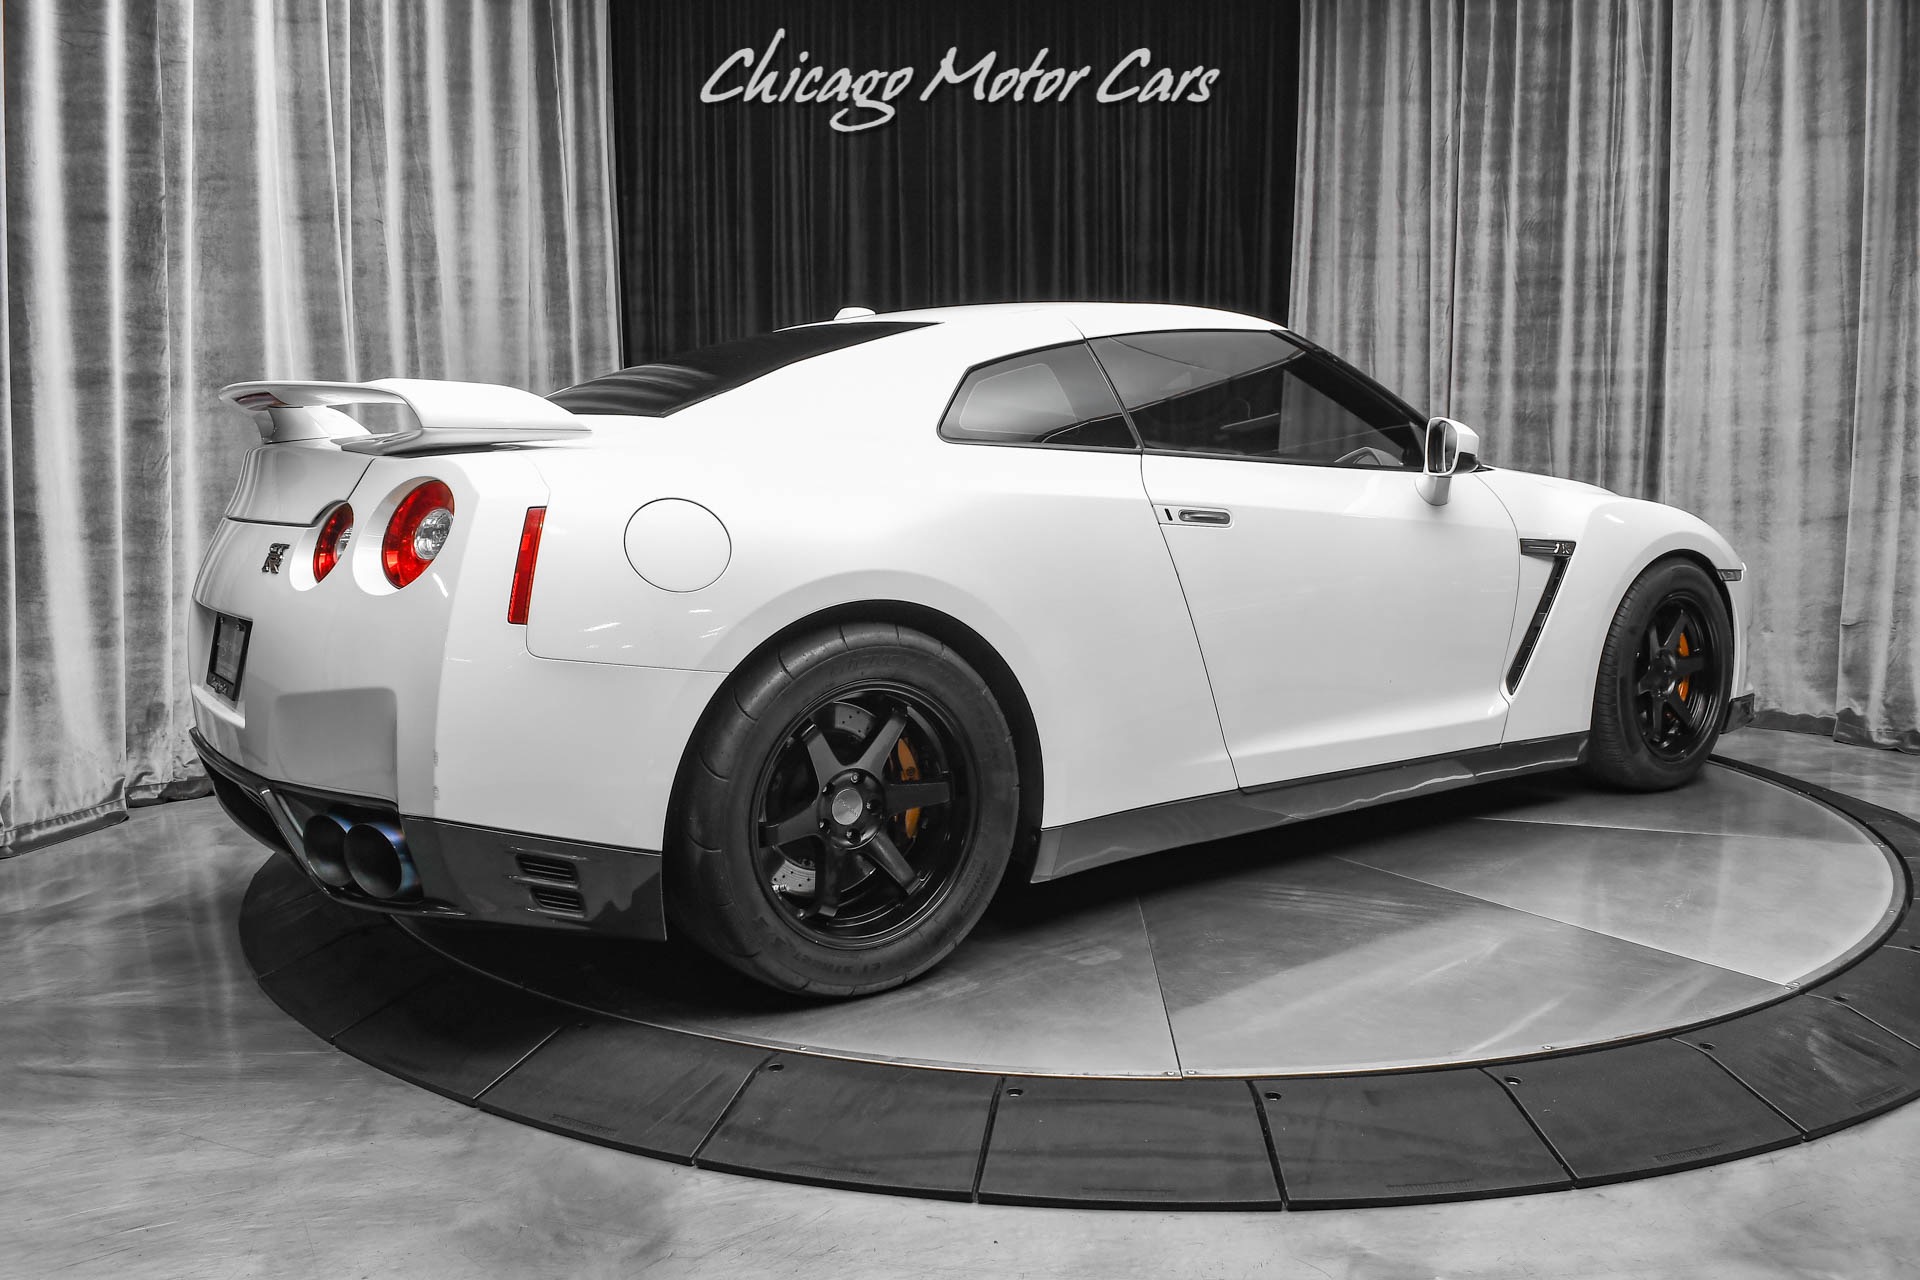 Used-2013-Nissan-GT-R-Premium-Coupe-Full-Bolt-On-Flex-Fuel-Tuned-645WHP